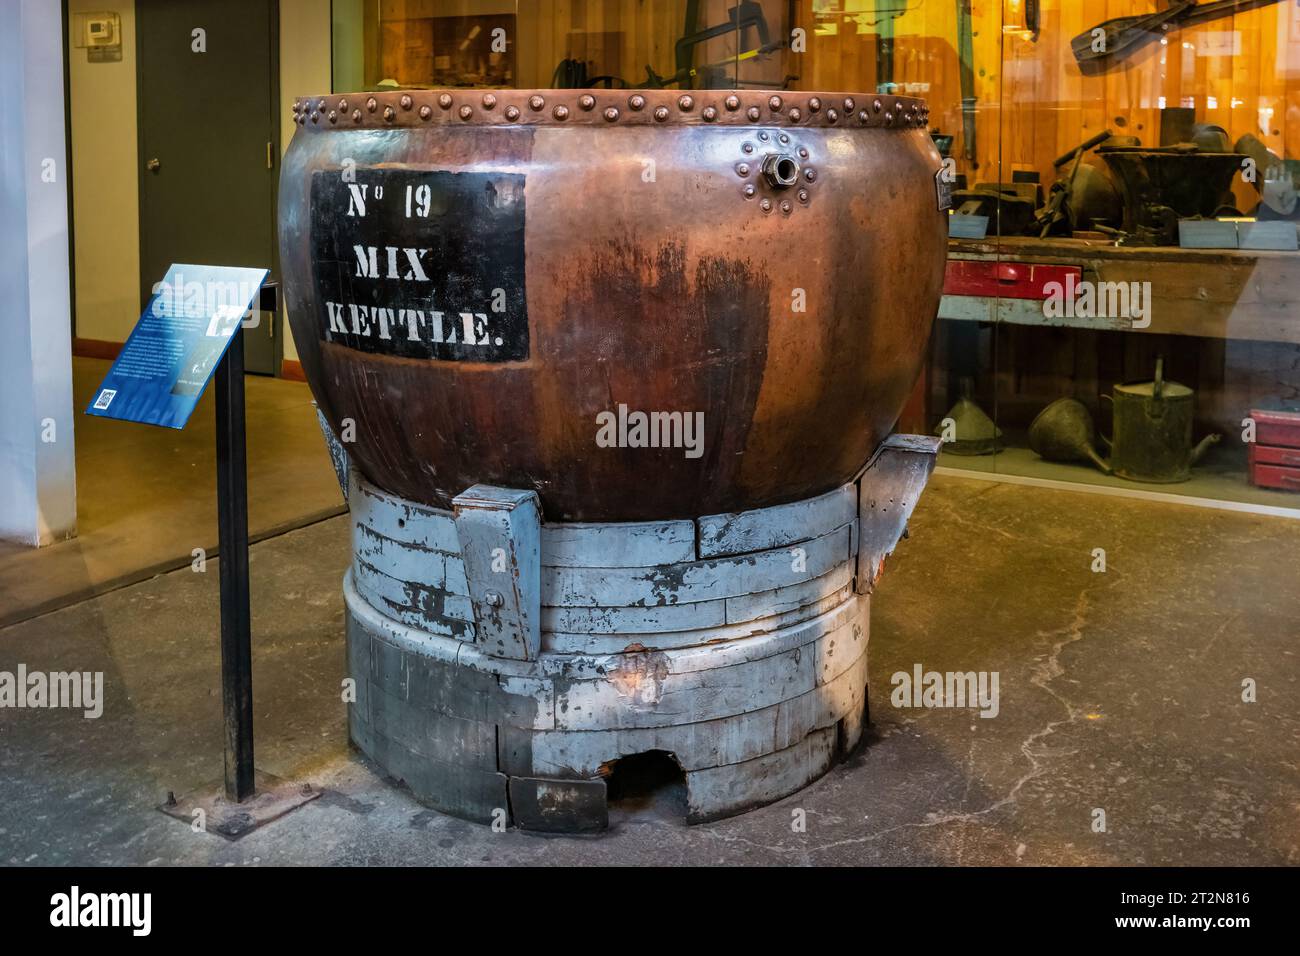 old metal alcohol distiller in the distillery Stock Photo - Alamy